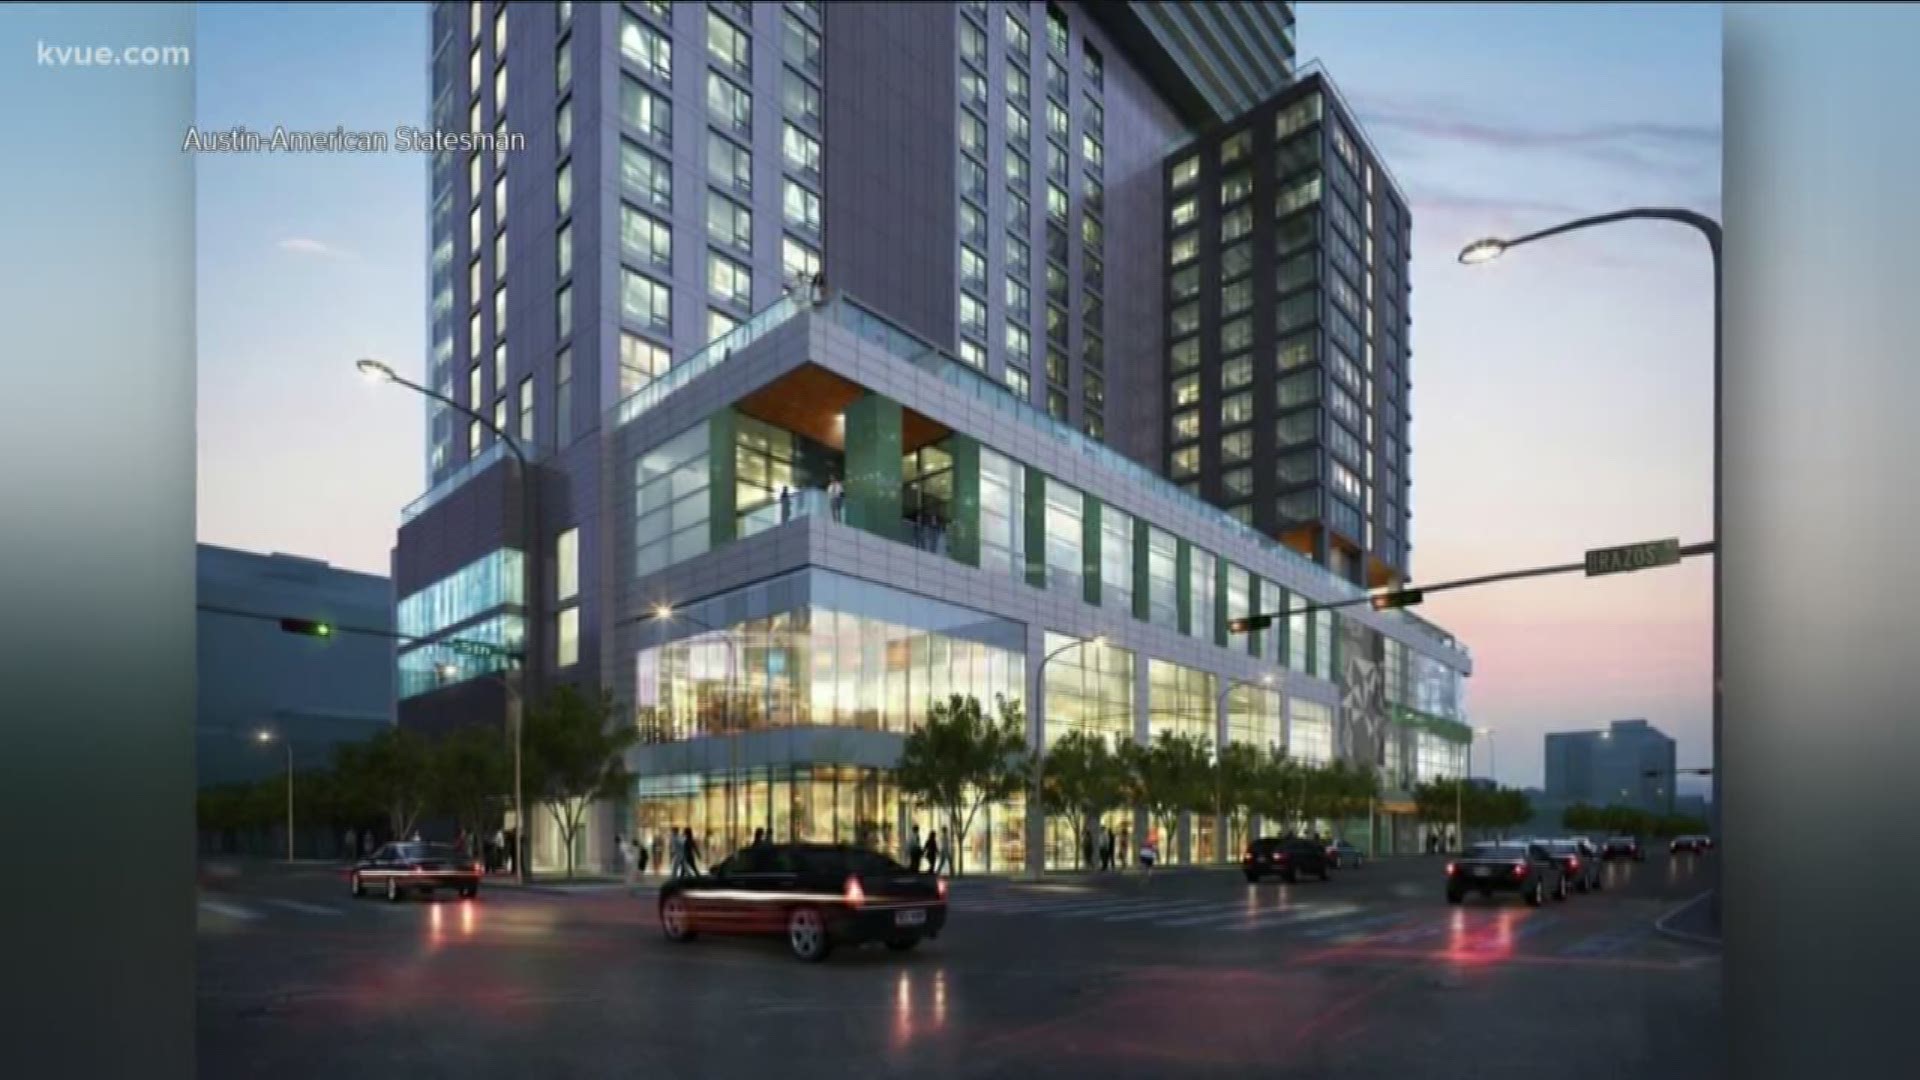 A 32-story tower is being built in Downtown Austin that will add two hotels and nearly 280 apartments to the area.